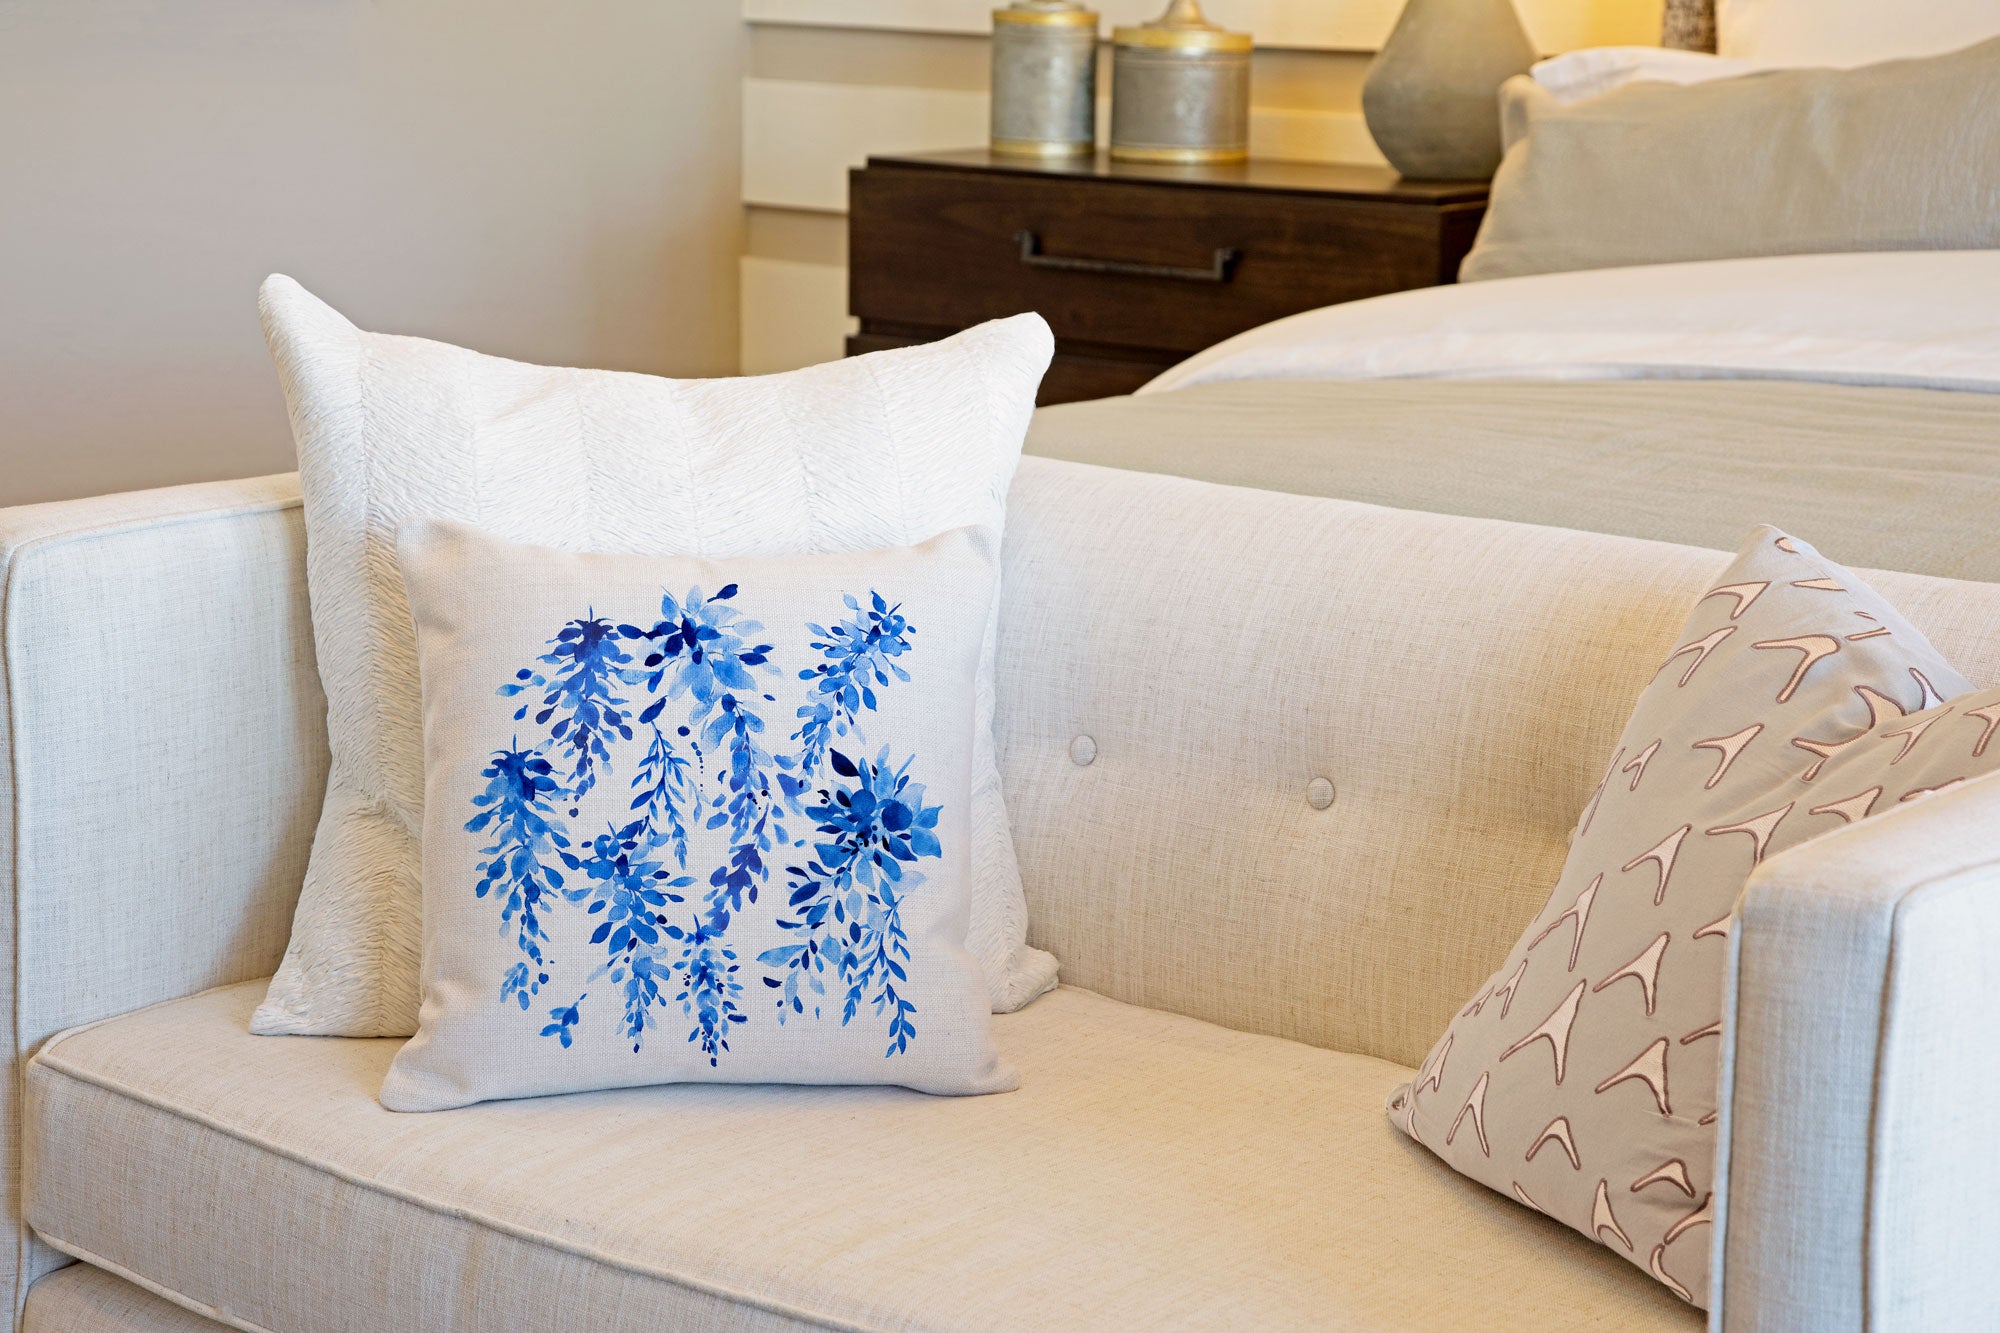 Blue Wisteria Floral Throw Pillow Cover - Decorative Designs Throw Pillow Cover Collection